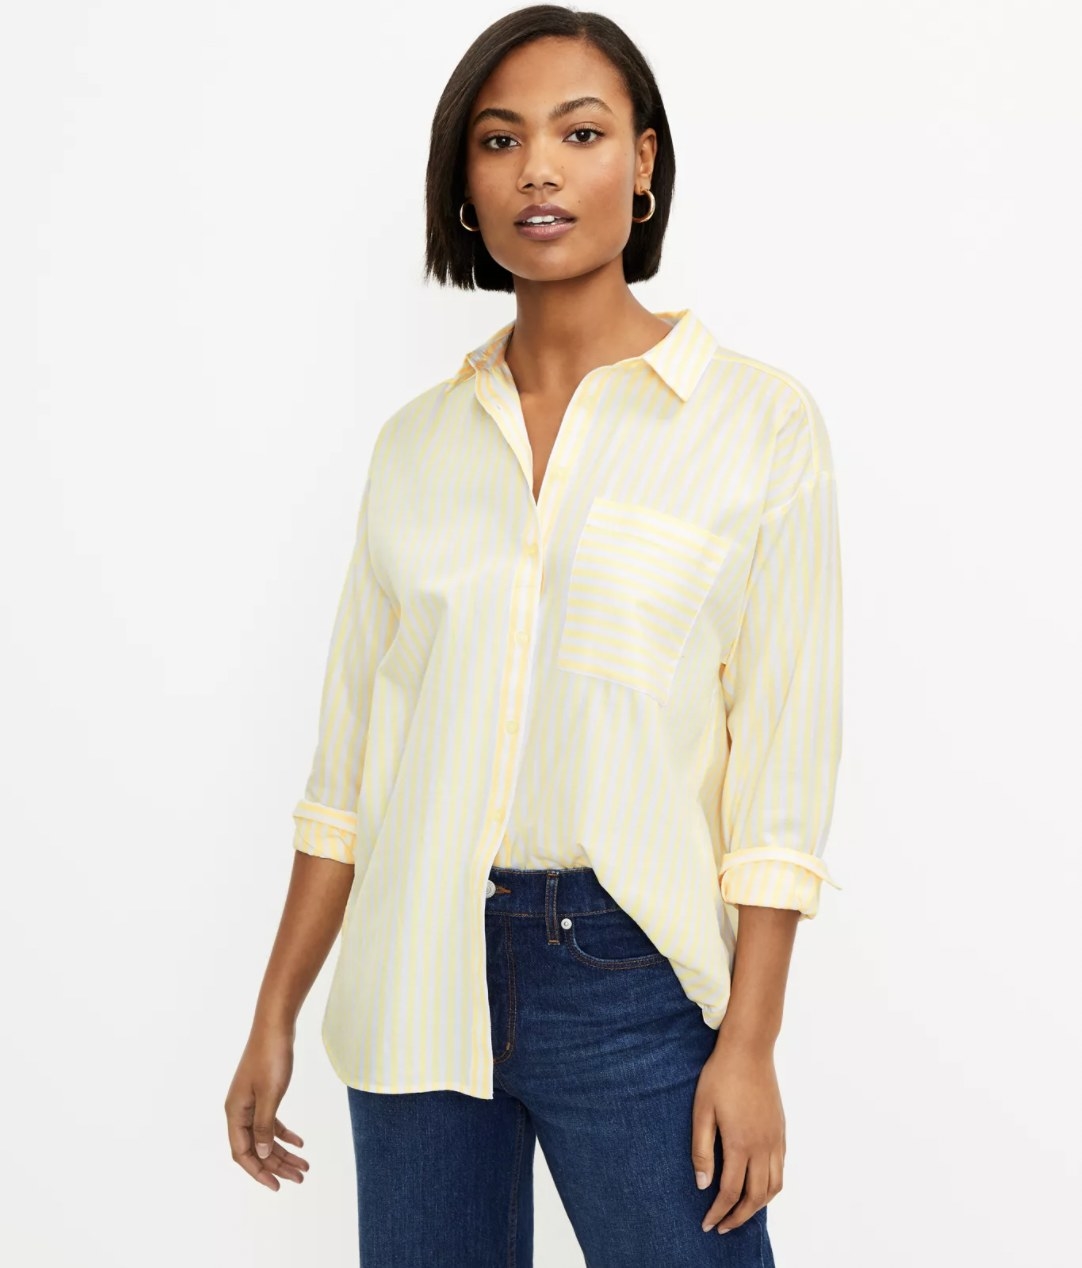 Model wearing the yellow striped shirt with sleeves rolled up and half of shirt tucked into jeans